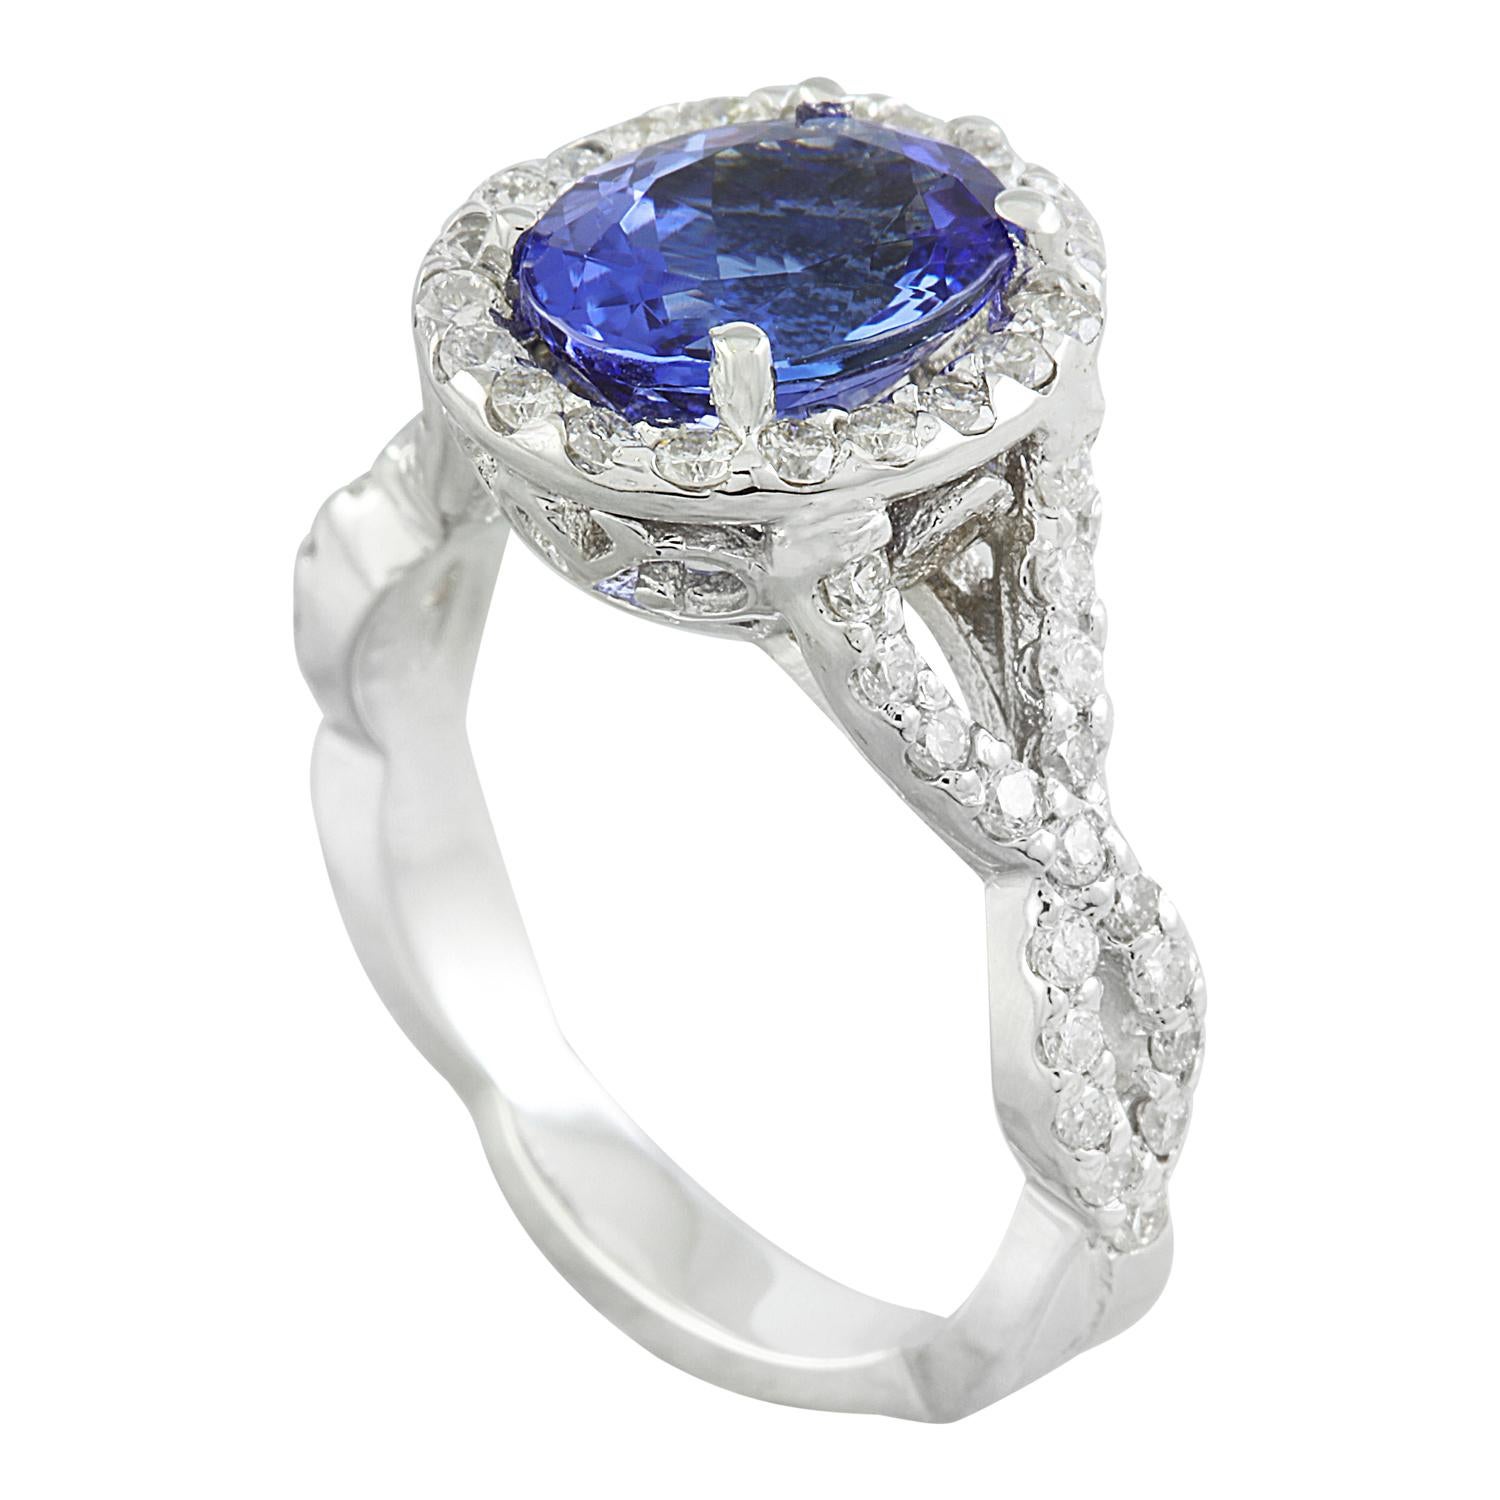 Introducing our captivating 3.23 Carat Natural Tanzanite Ring, exquisitely set in lustrous 14 Karat Solid White Gold. Authenticated with a stamped mark of 14K. Weighing 5.7 grams in total, it promises both comfort and durability. The centerpiece of